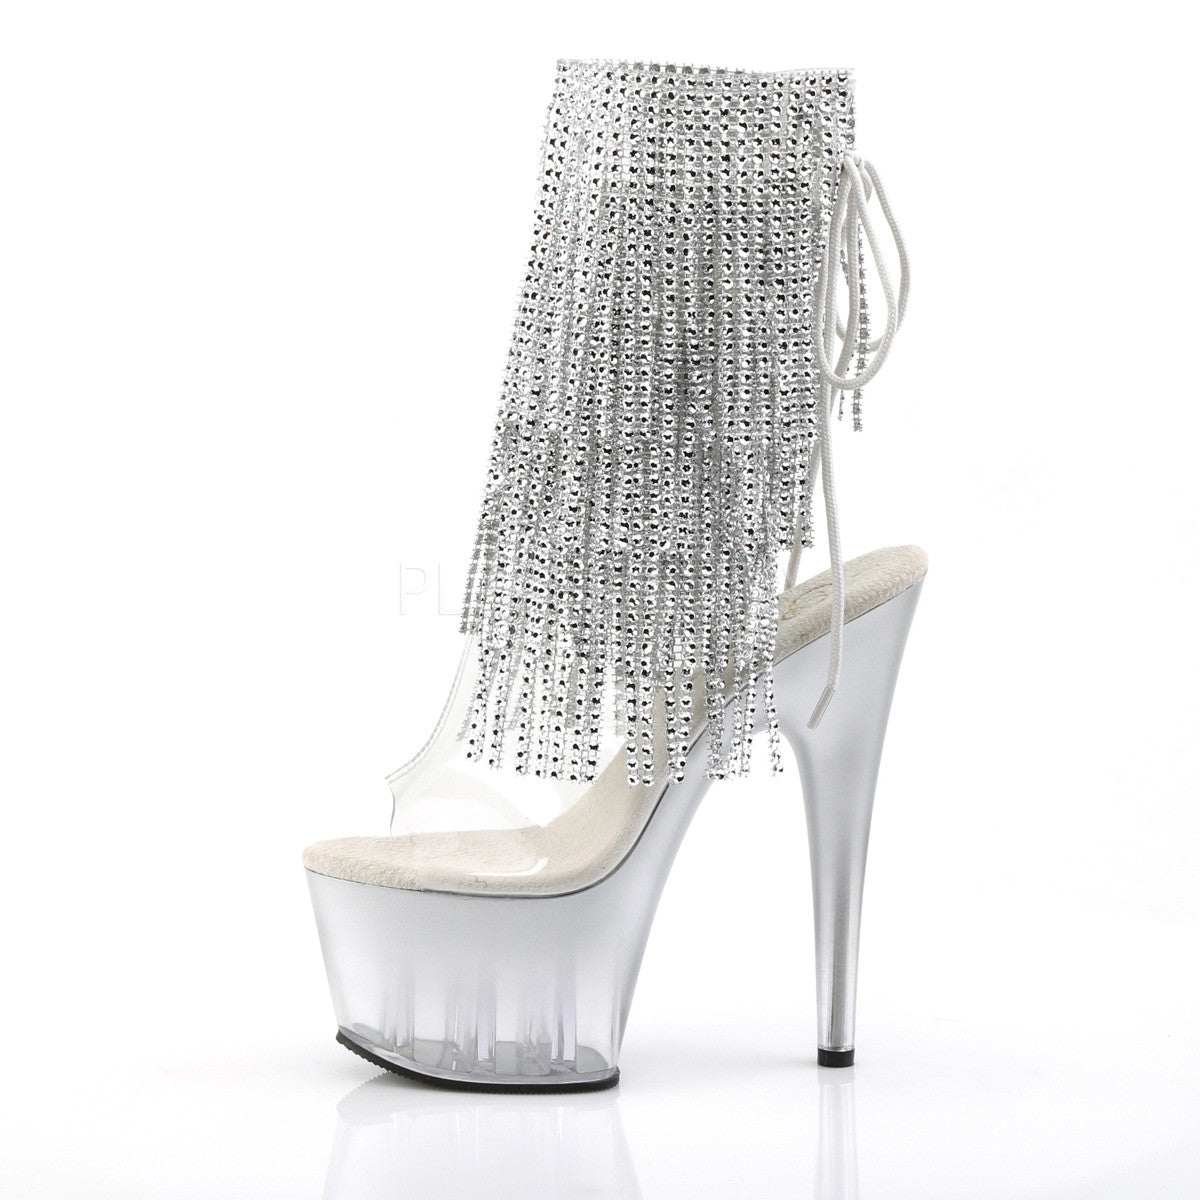 Pleaser ADORE-1017RSFT Silver Fringe Ankle Boots - Shoecup.com - 3